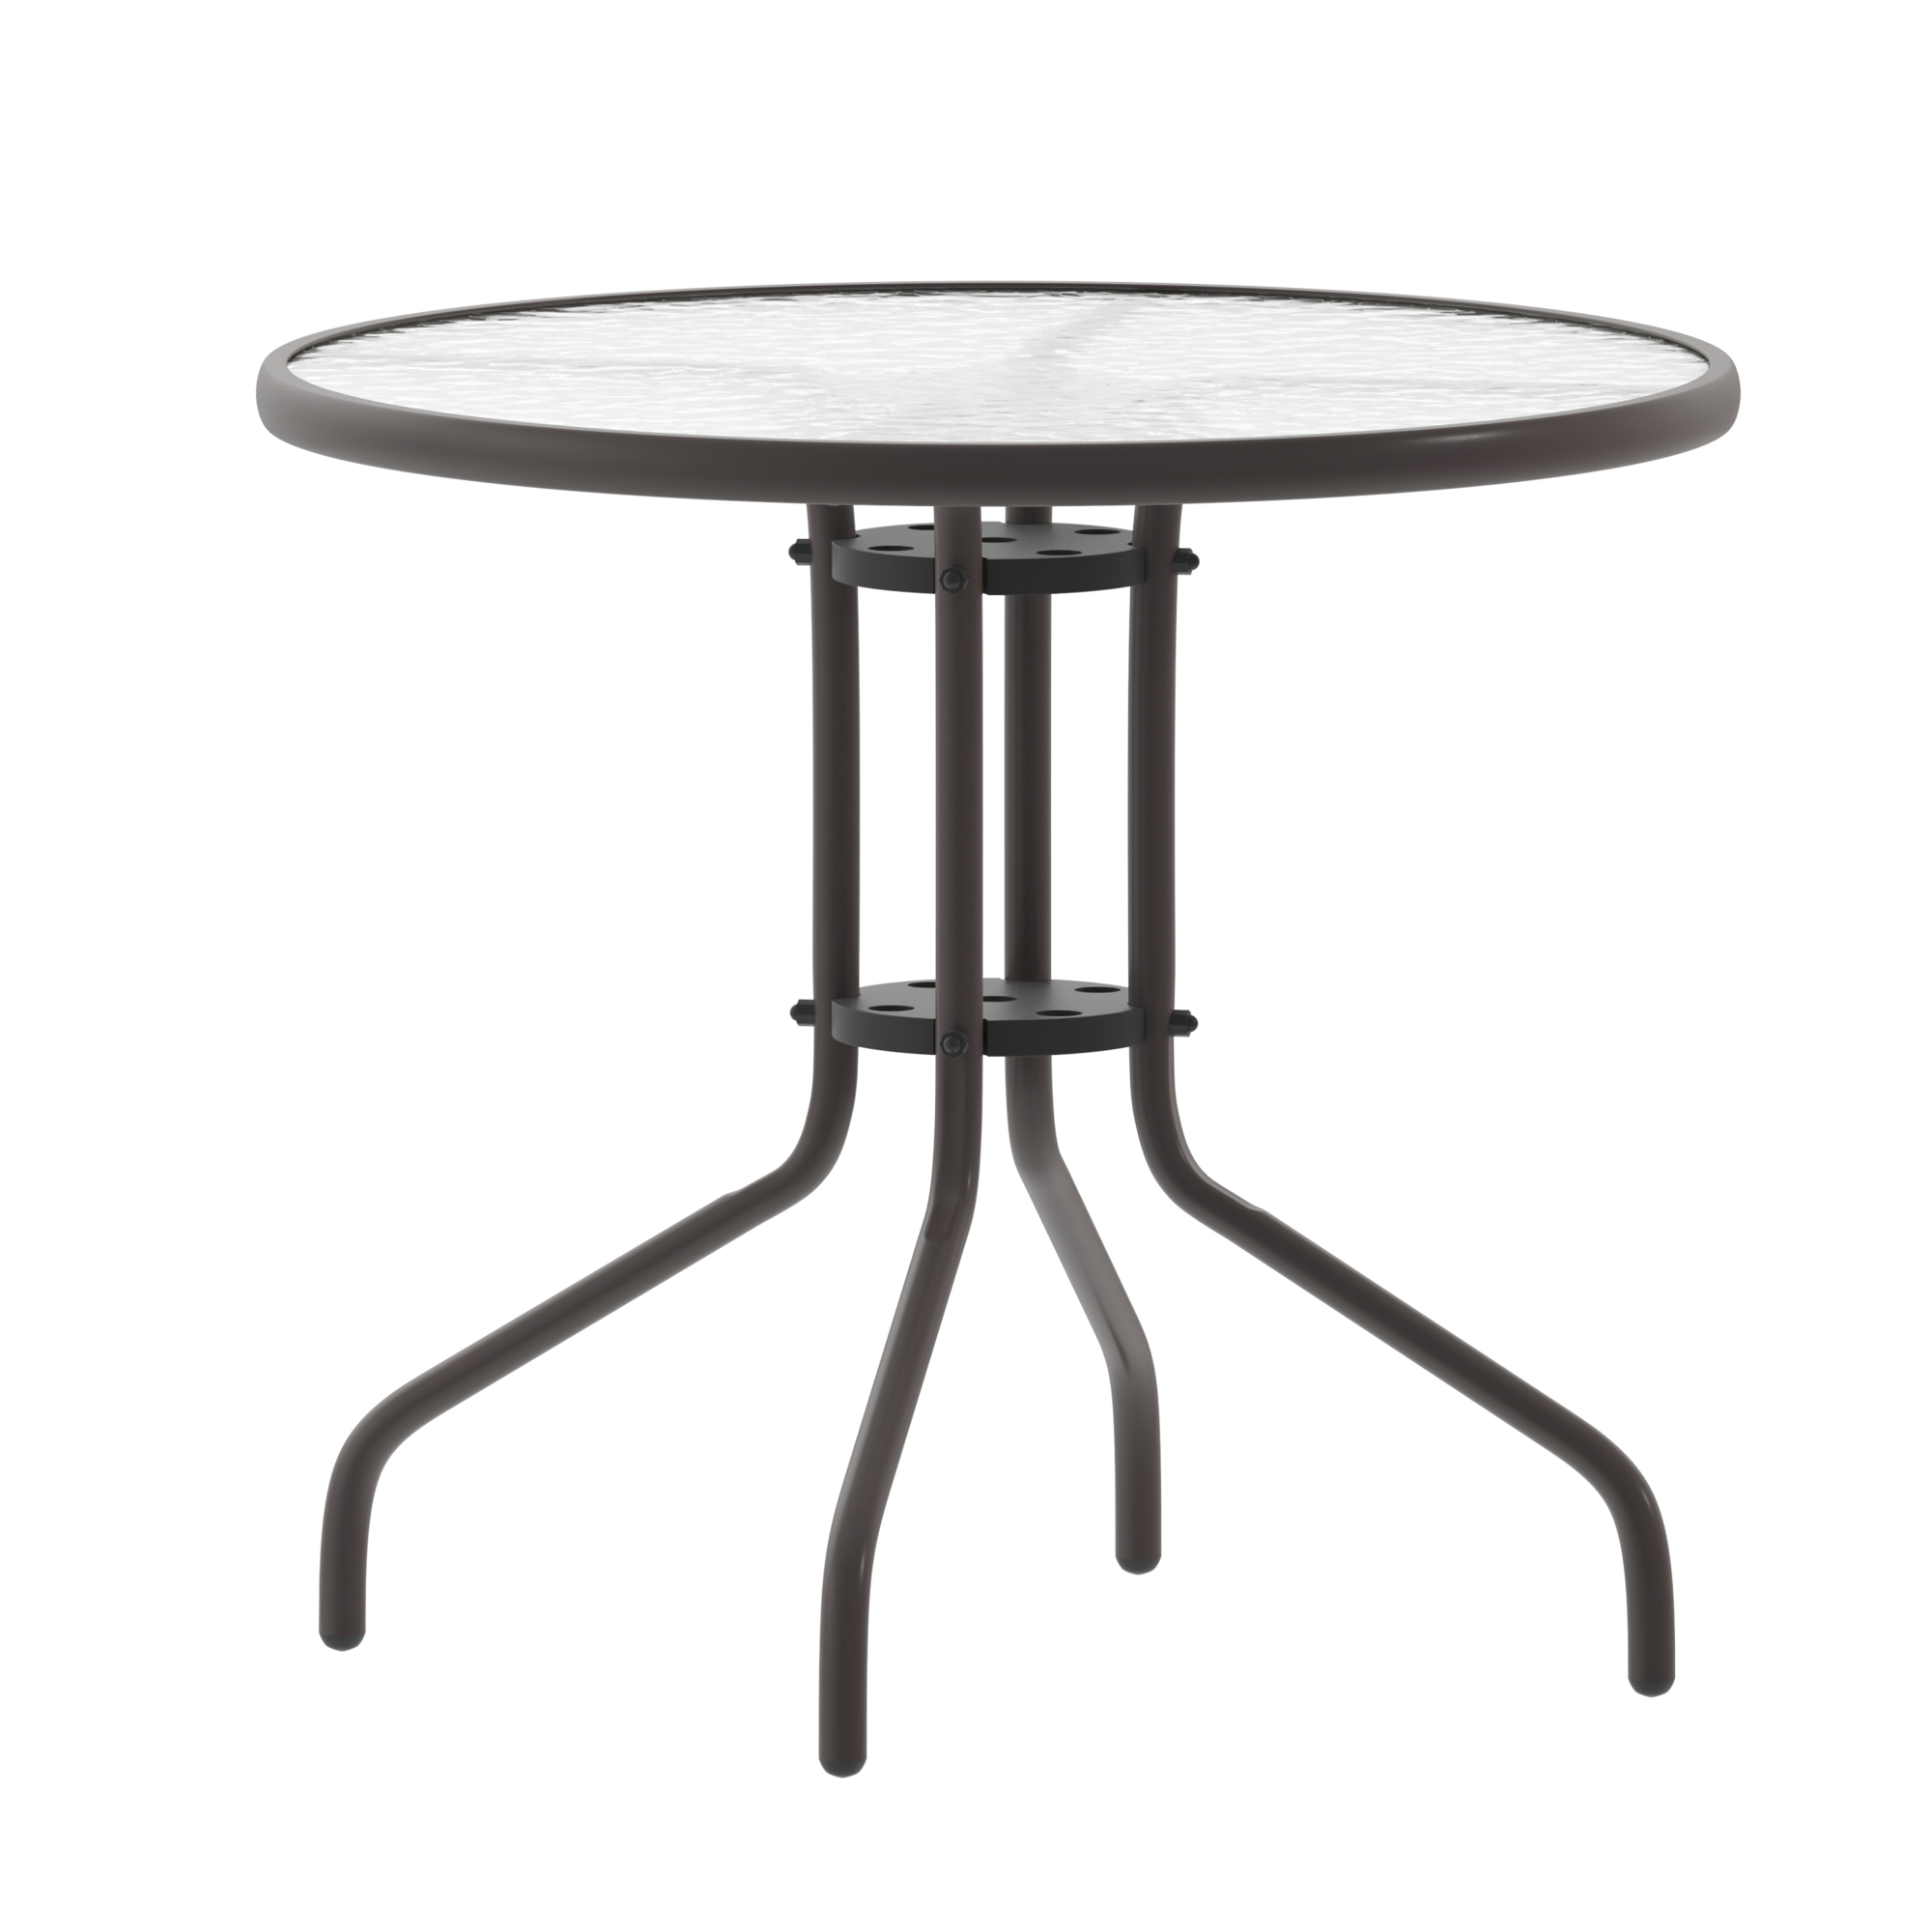 Flash Furniture, 31.5Inch Round Tempered Glass Metal Table, Table Shape Round, Primary Color Brown, Height 28 in, Model TLH0702BZ